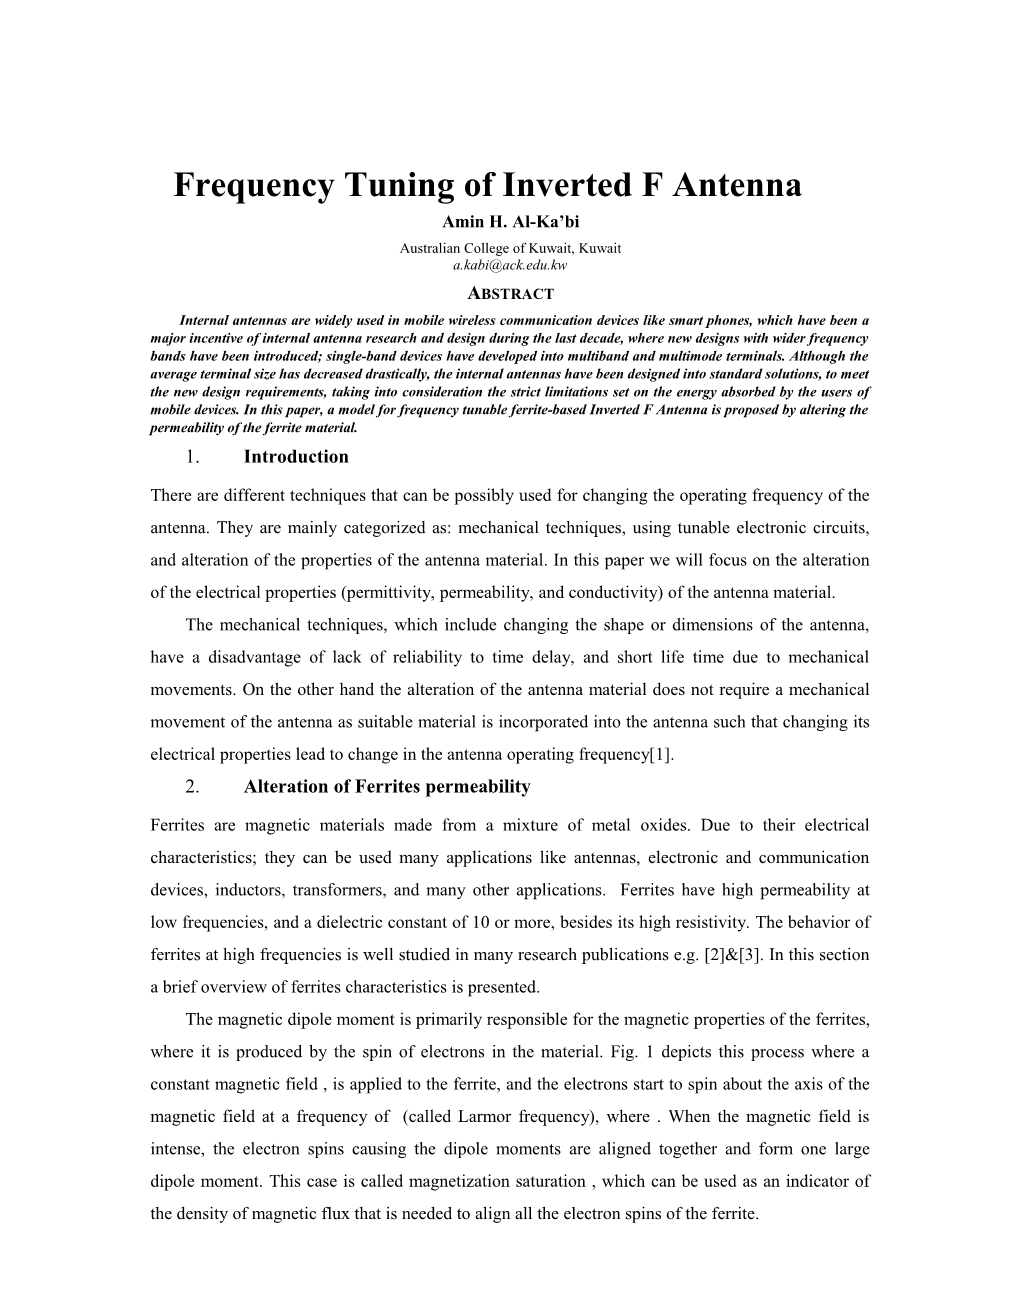 Frequency Tuning of Inverted F Antenna